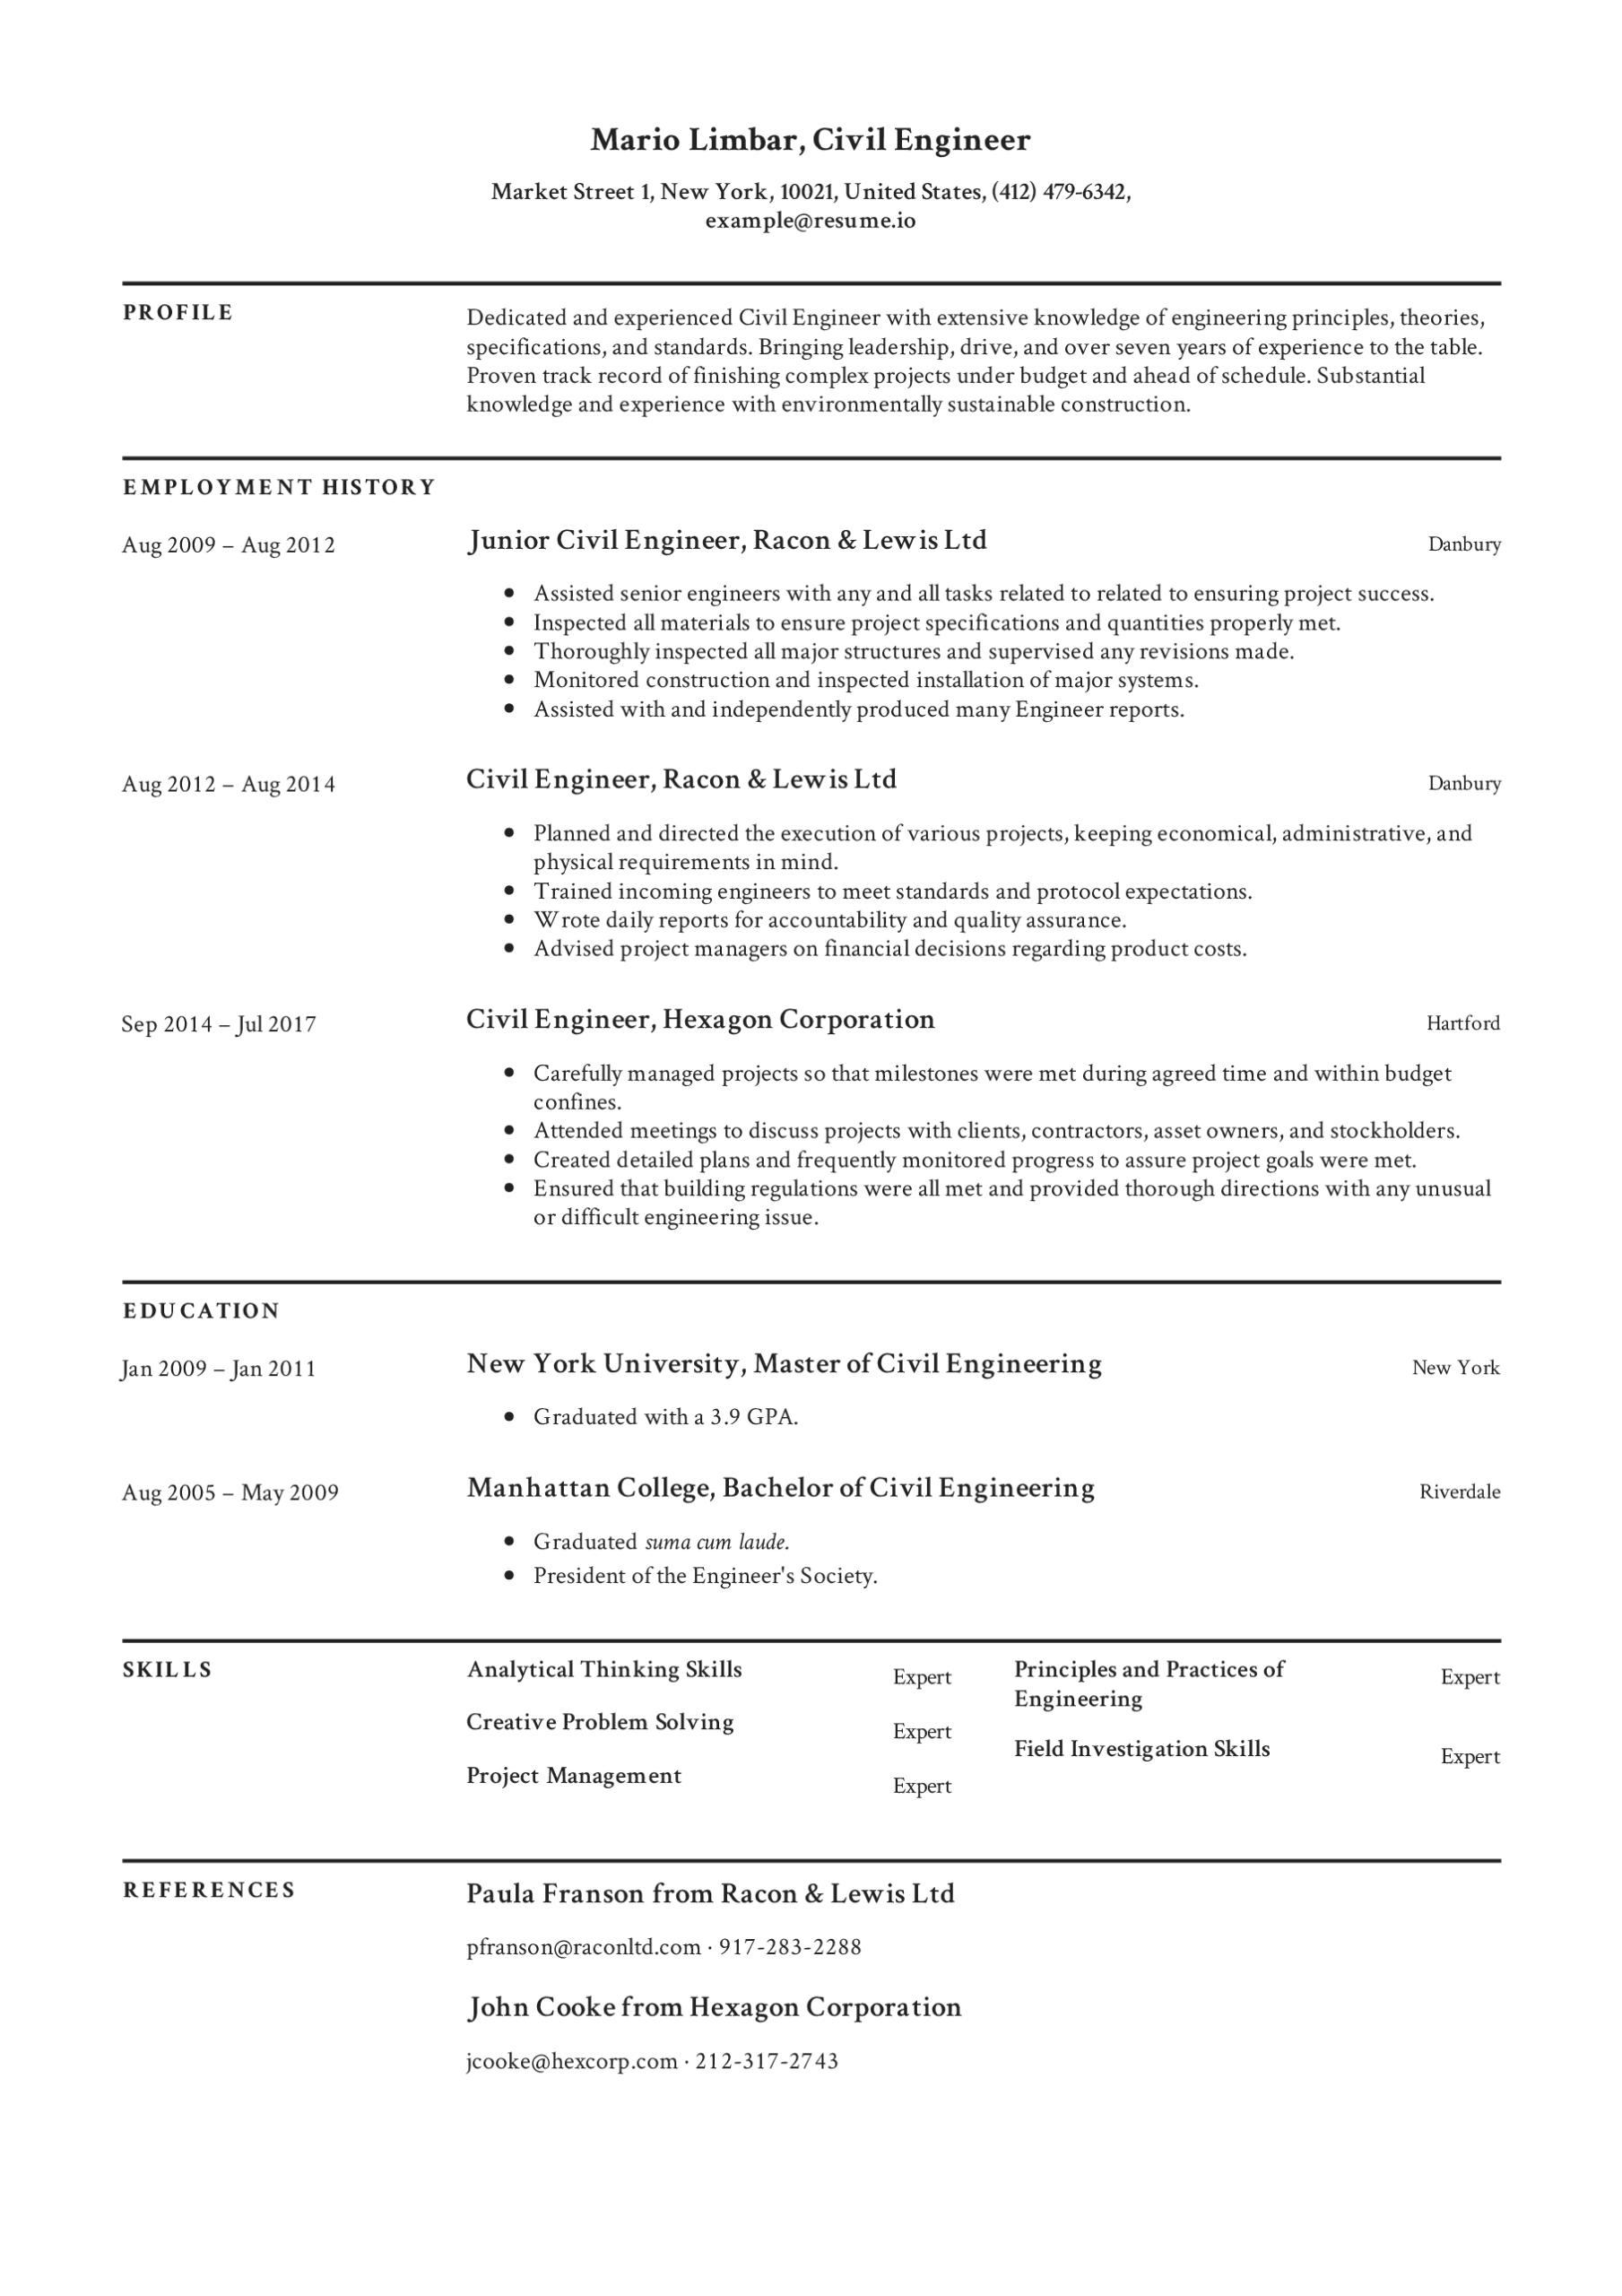 Civil Engineer Resume Templates 2020 (Free Download) · Resume.io In Country Report Template Middle School